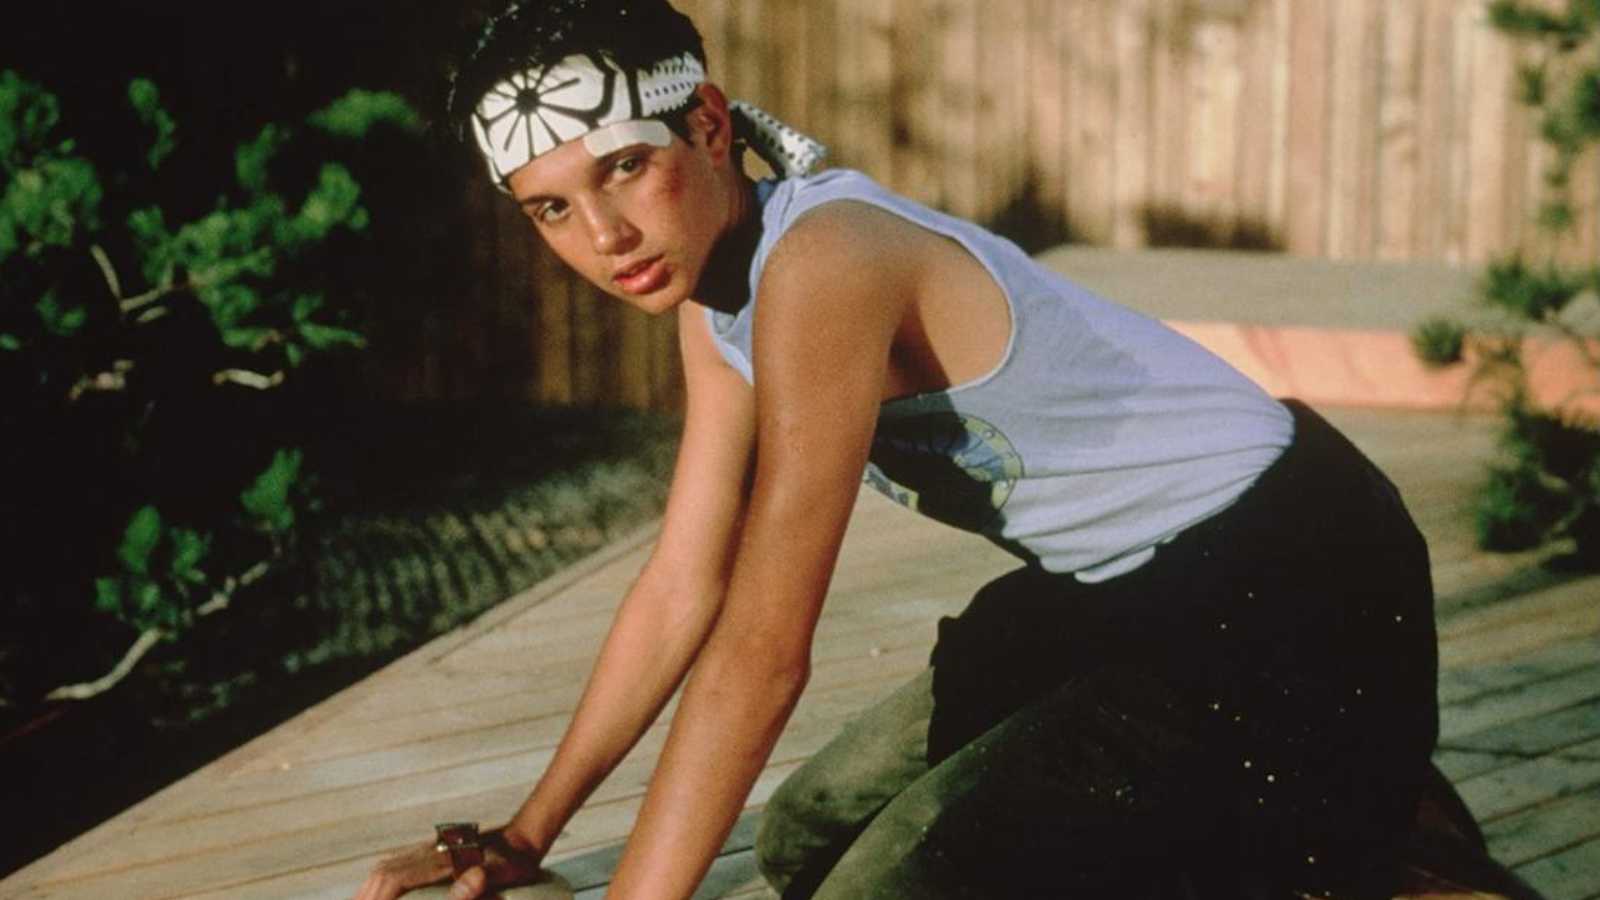 <p><em>Karate Kid</em> is a classic film where a boy, Daniel, gets bullied by students of a local karate school. To defend himself, Daniel befriends a fantastic instructor to help him learn karate. During his training, Daniel is paired against one of the bullies at a tournament. He beats the bully, but some fans wish he hadn’t won the fight.</p>